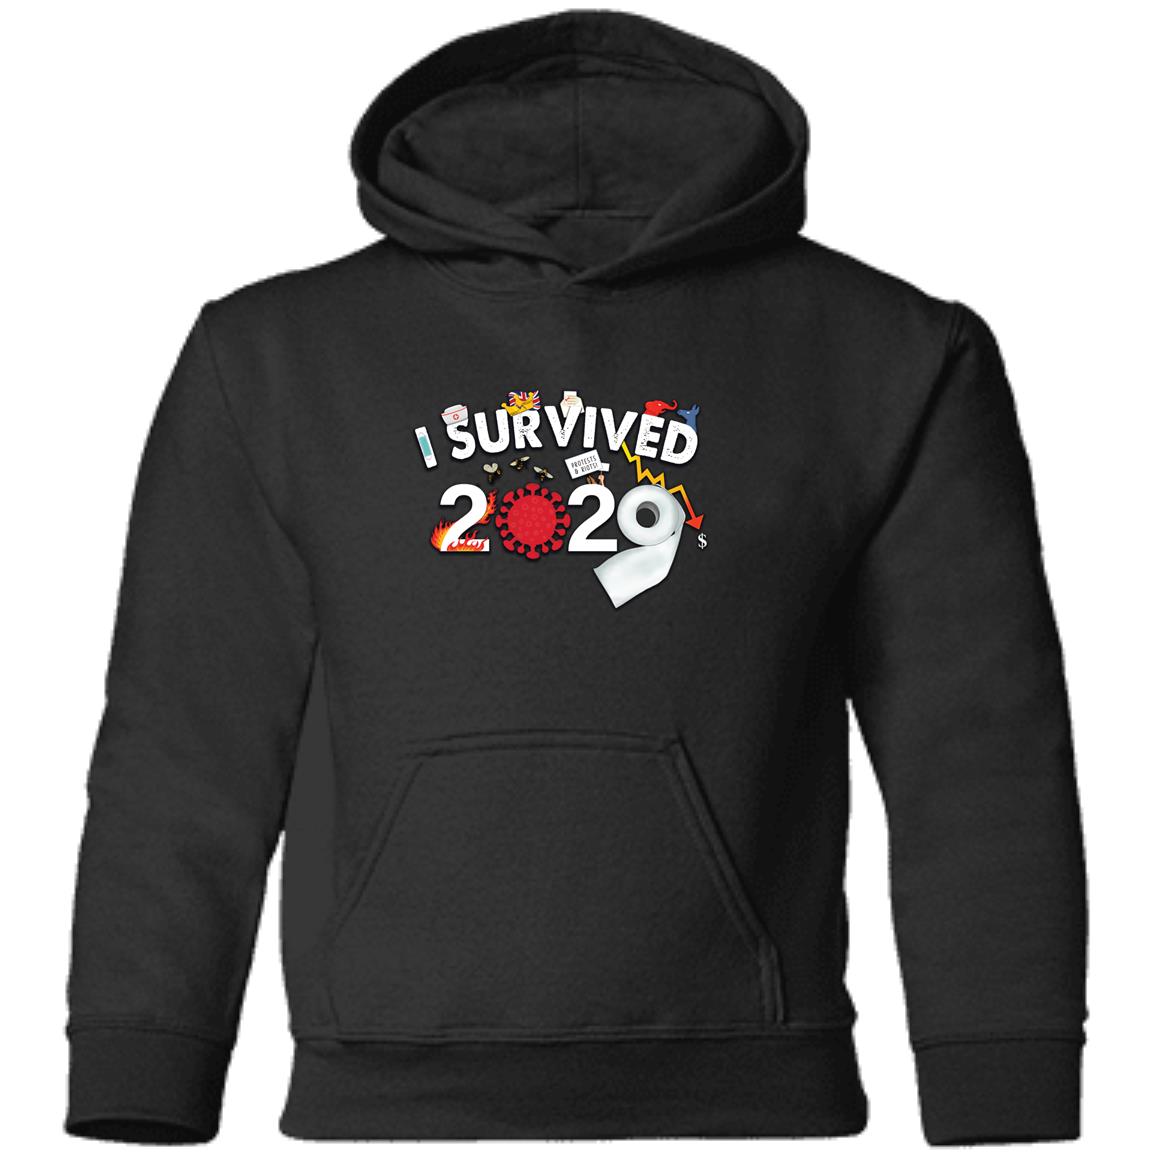 I Survived 2020 - Toddler Pullover Hoodie